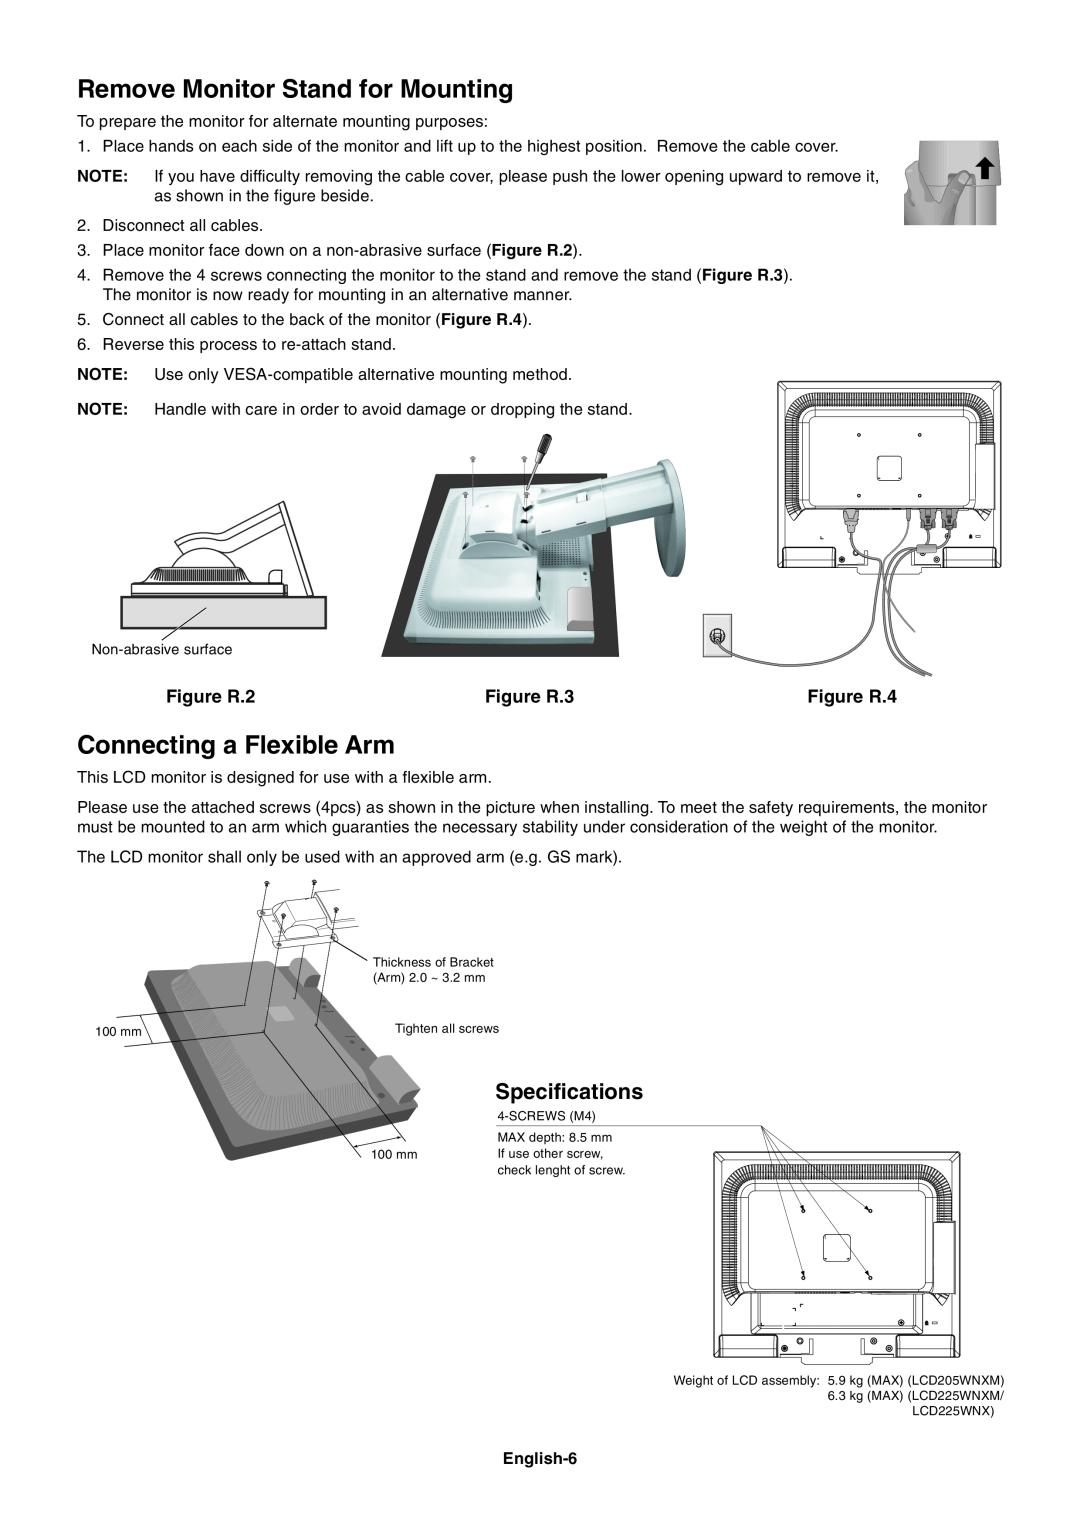 NEC LCD225WNXM Remove Monitor Stand for Mounting, Connecting a Flexible Arm, Figure R.2, Figure R.3, Figure R.4 